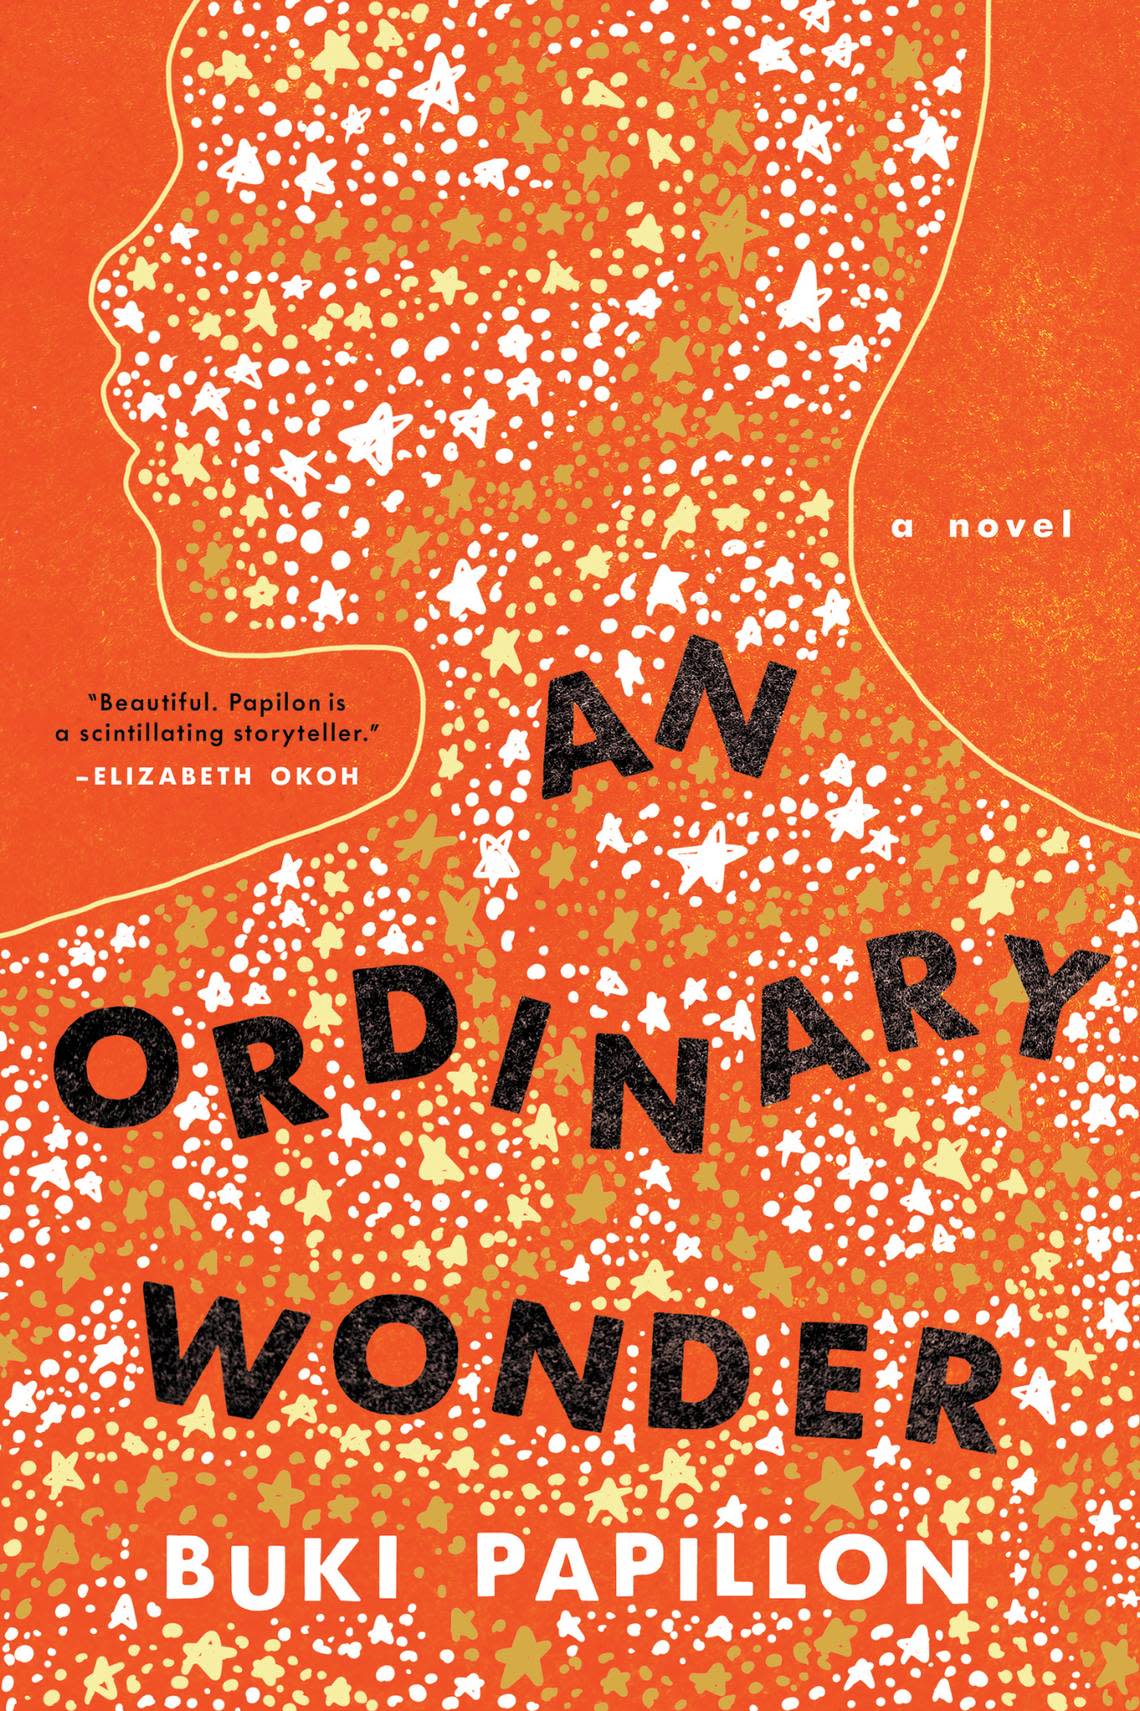 Buki Papillon’s “An Ordinary Wonder” is the latest selection of the FYI Book Club.